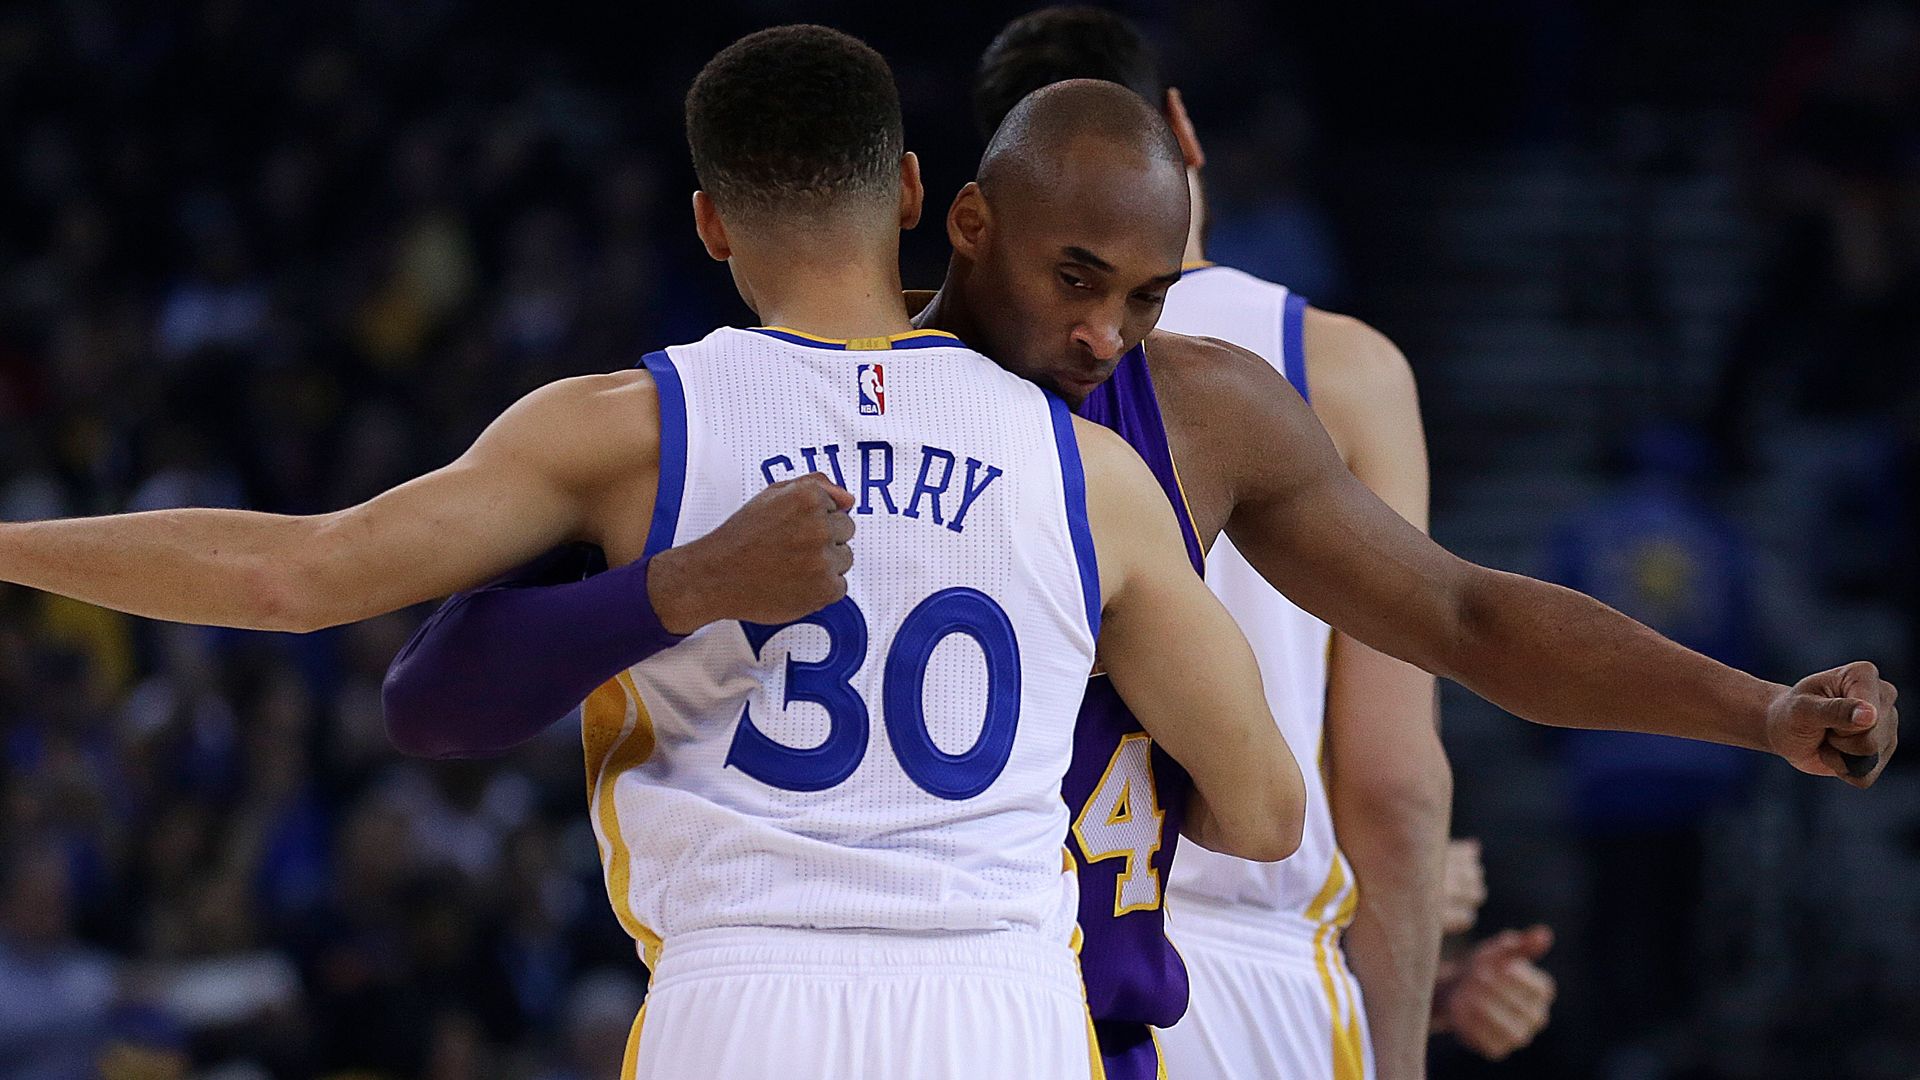 Dollar Stores Facts Nobody Wants To Talk About - Stephen Curry And Kobe Bryant , HD Wallpaper & Backgrounds